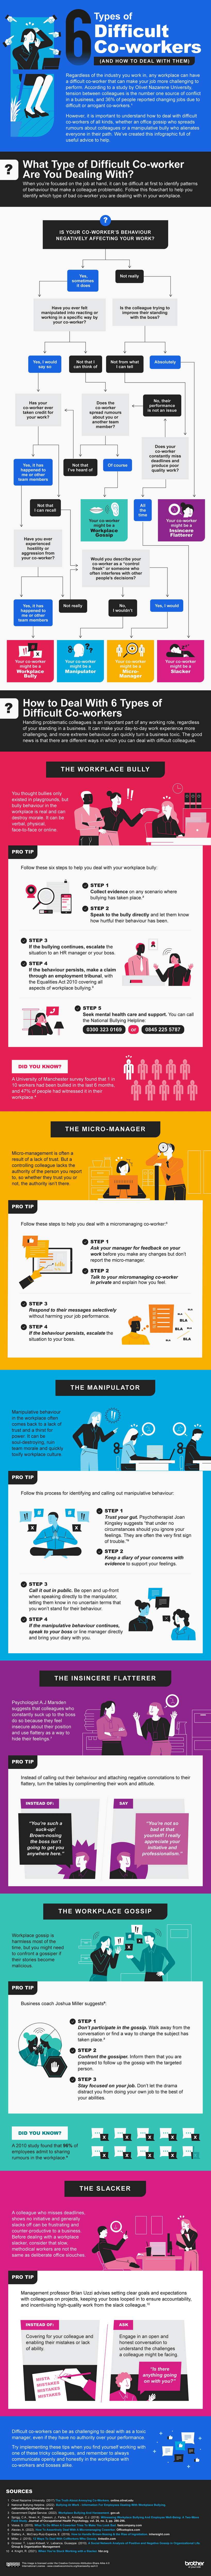 Infographic: '6 types of difficult co-workers (and how to deal with them'